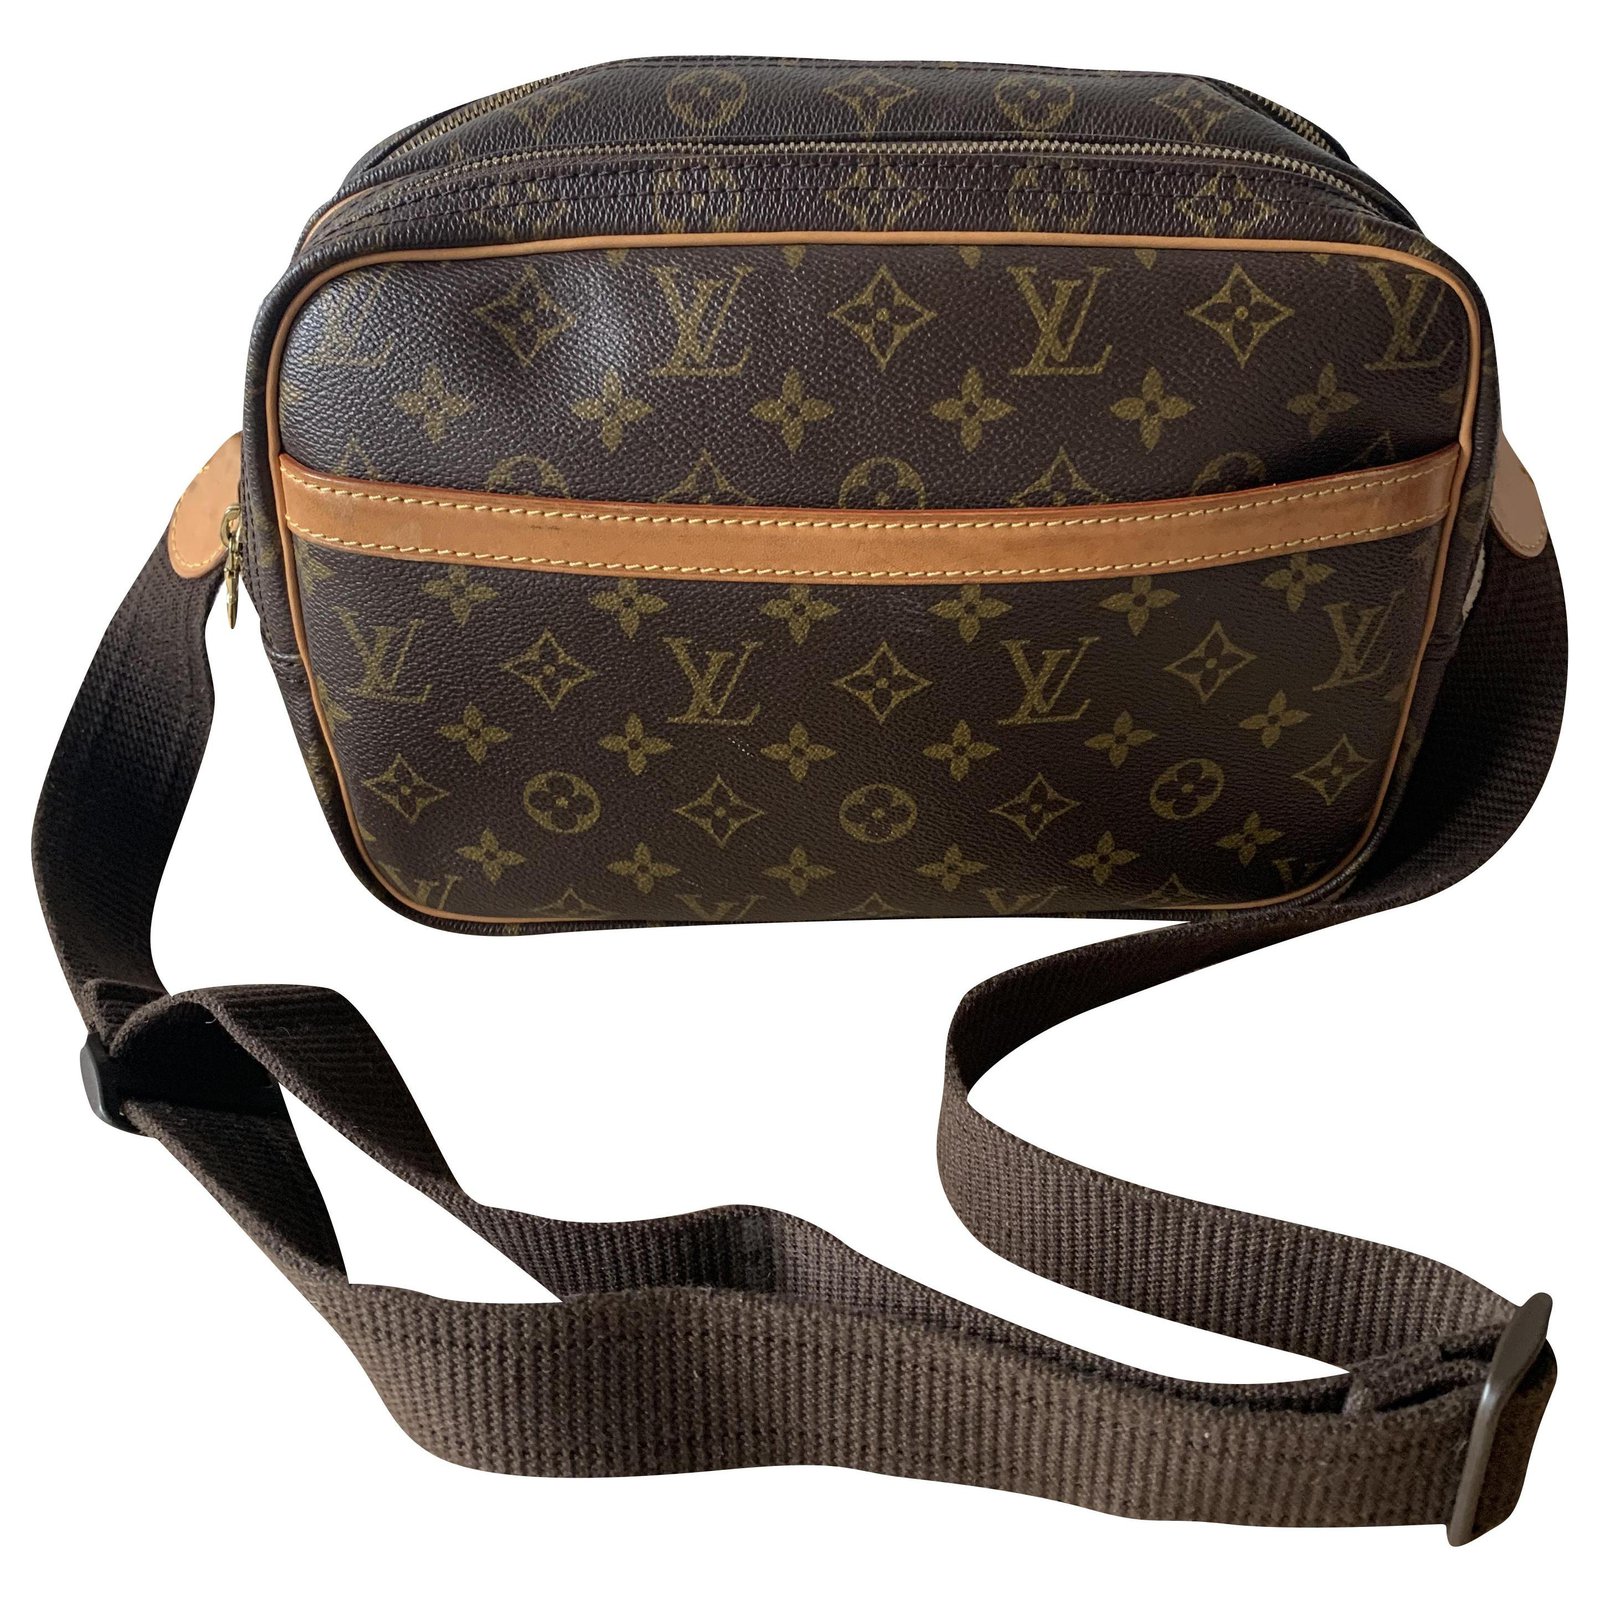 Louis Vuitton fixes data leak and account takeover vulnerability